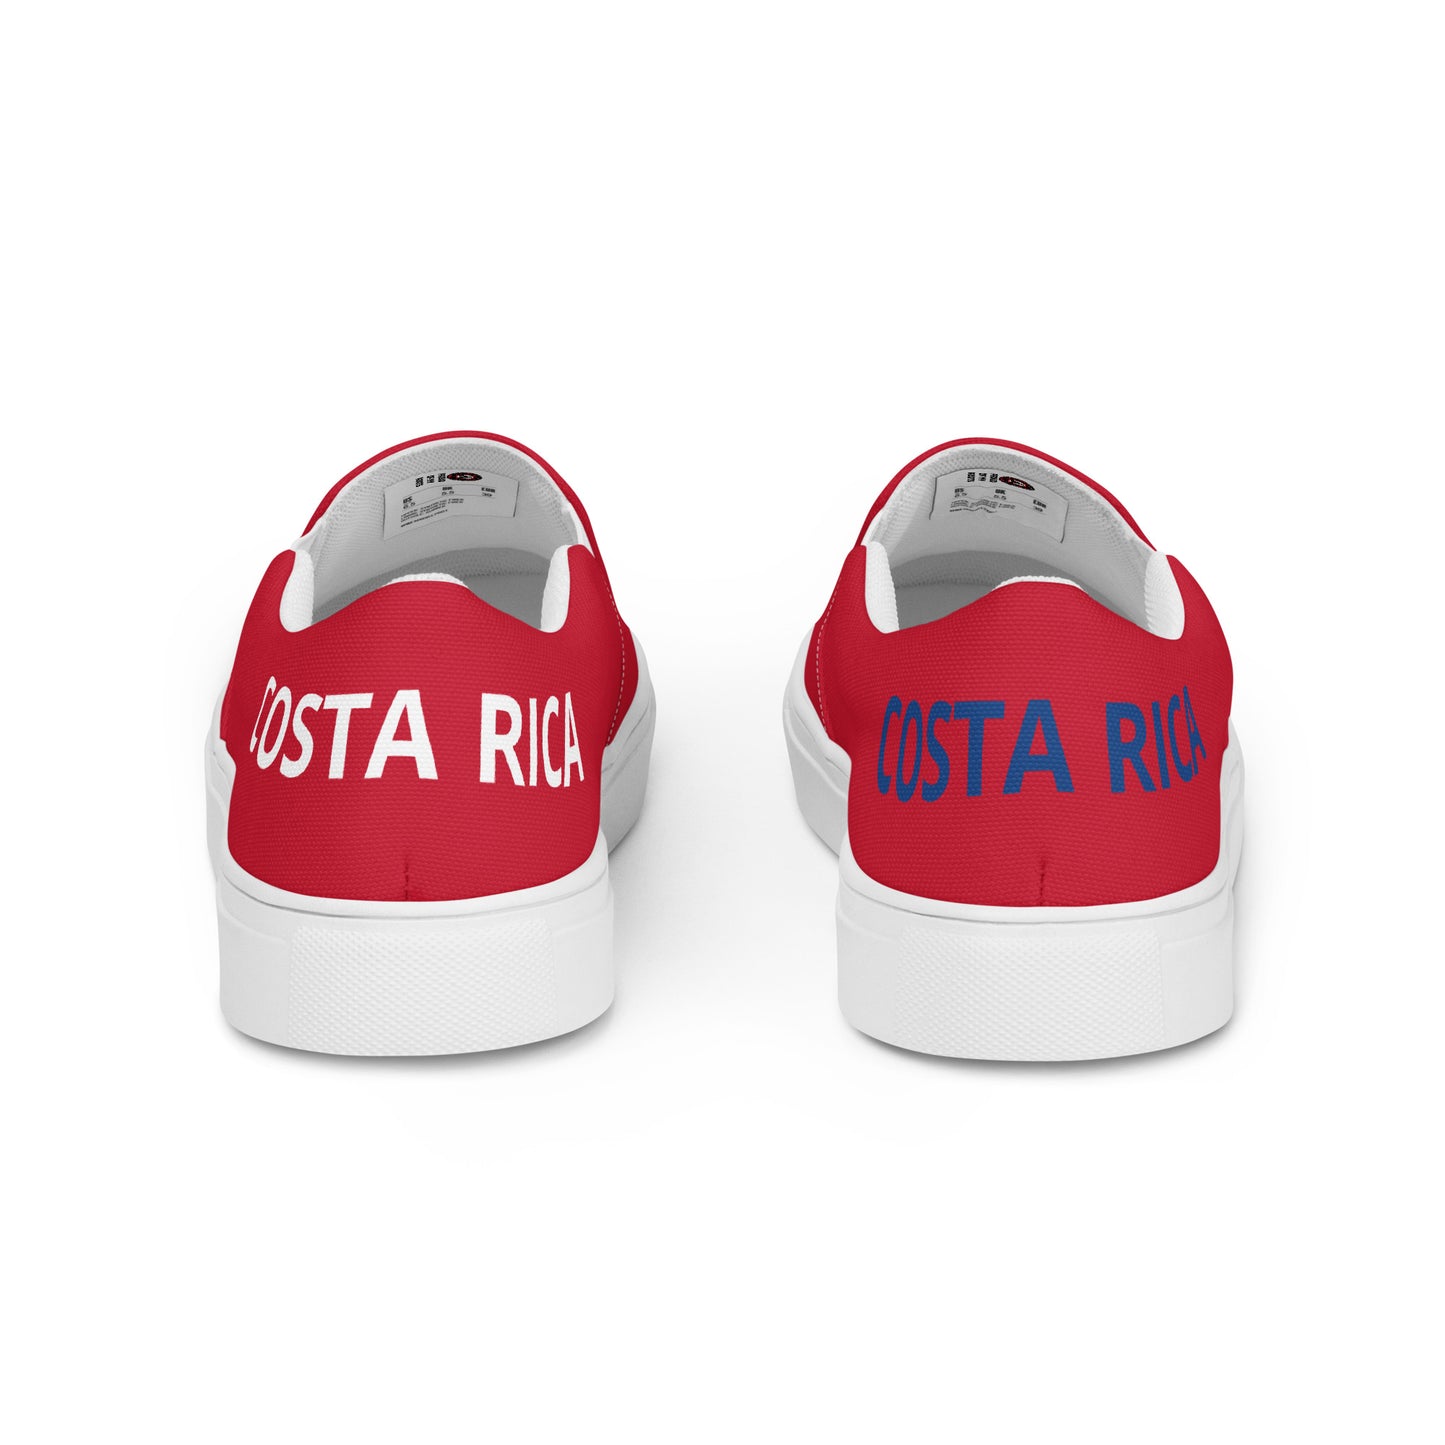 Costa Rica - Women - Red - Slip-on shoes